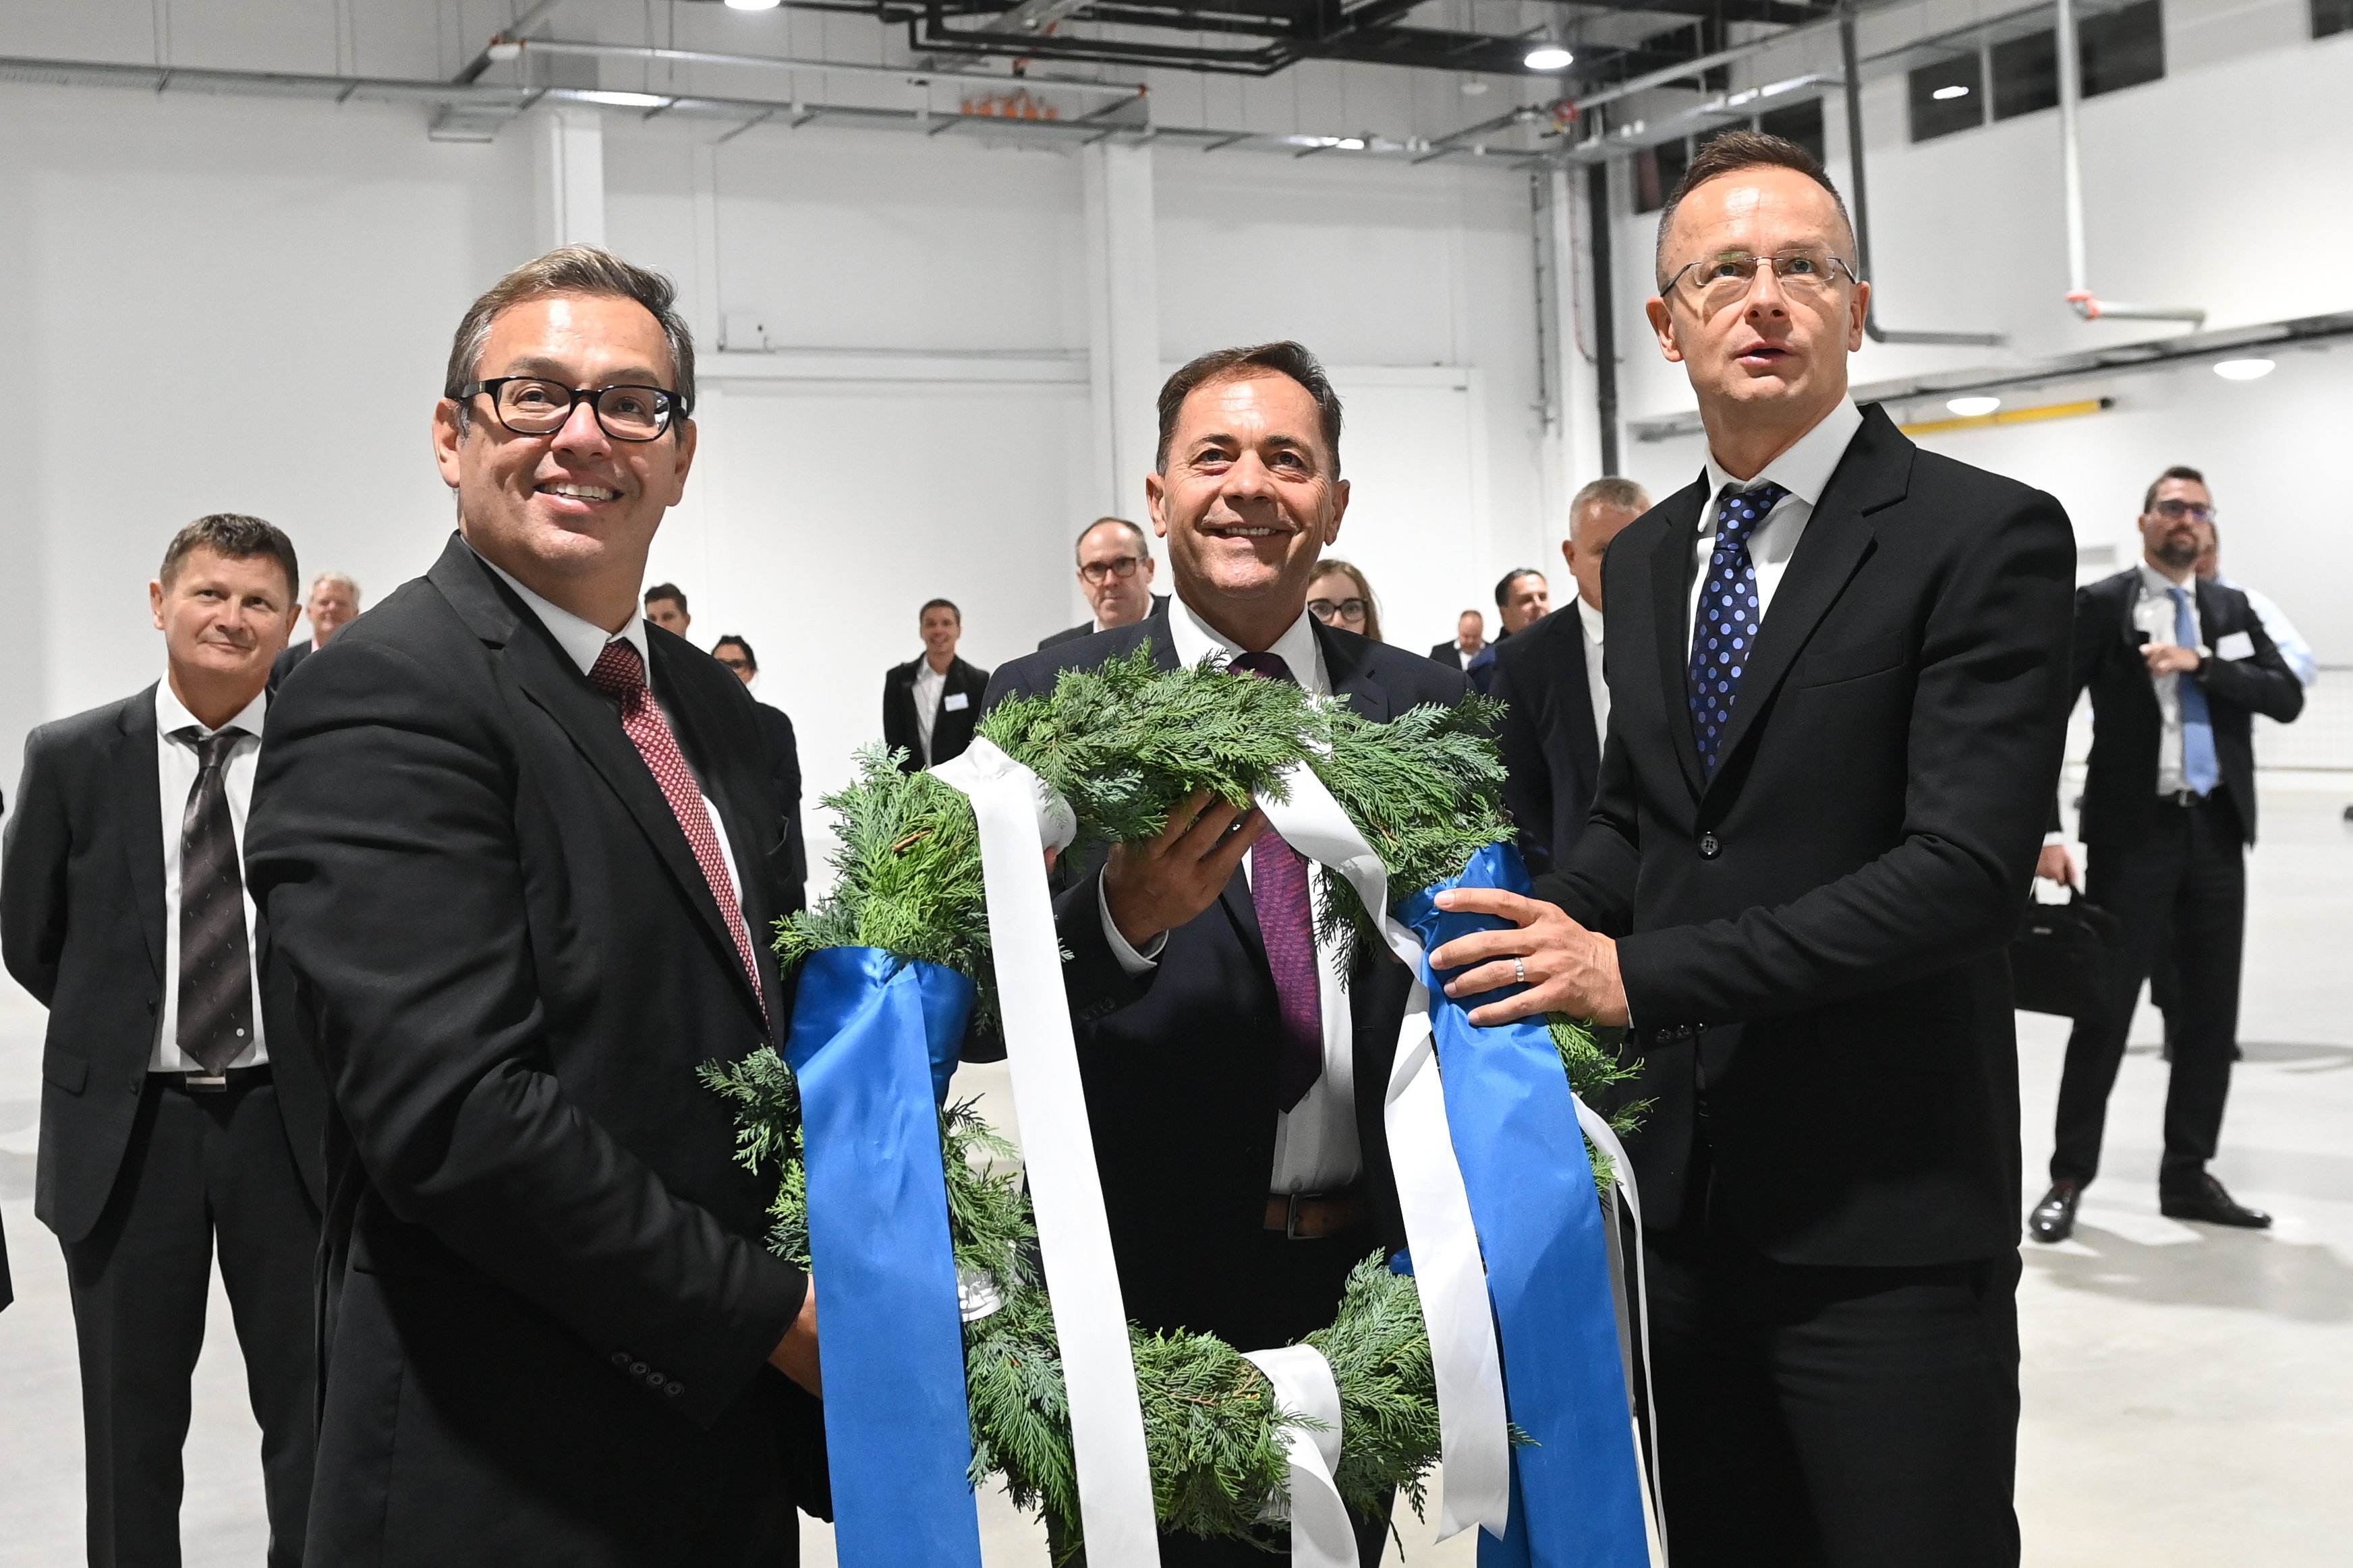 Thyssenkrupp Tops out HUF 15 bln Expansion in Hungary